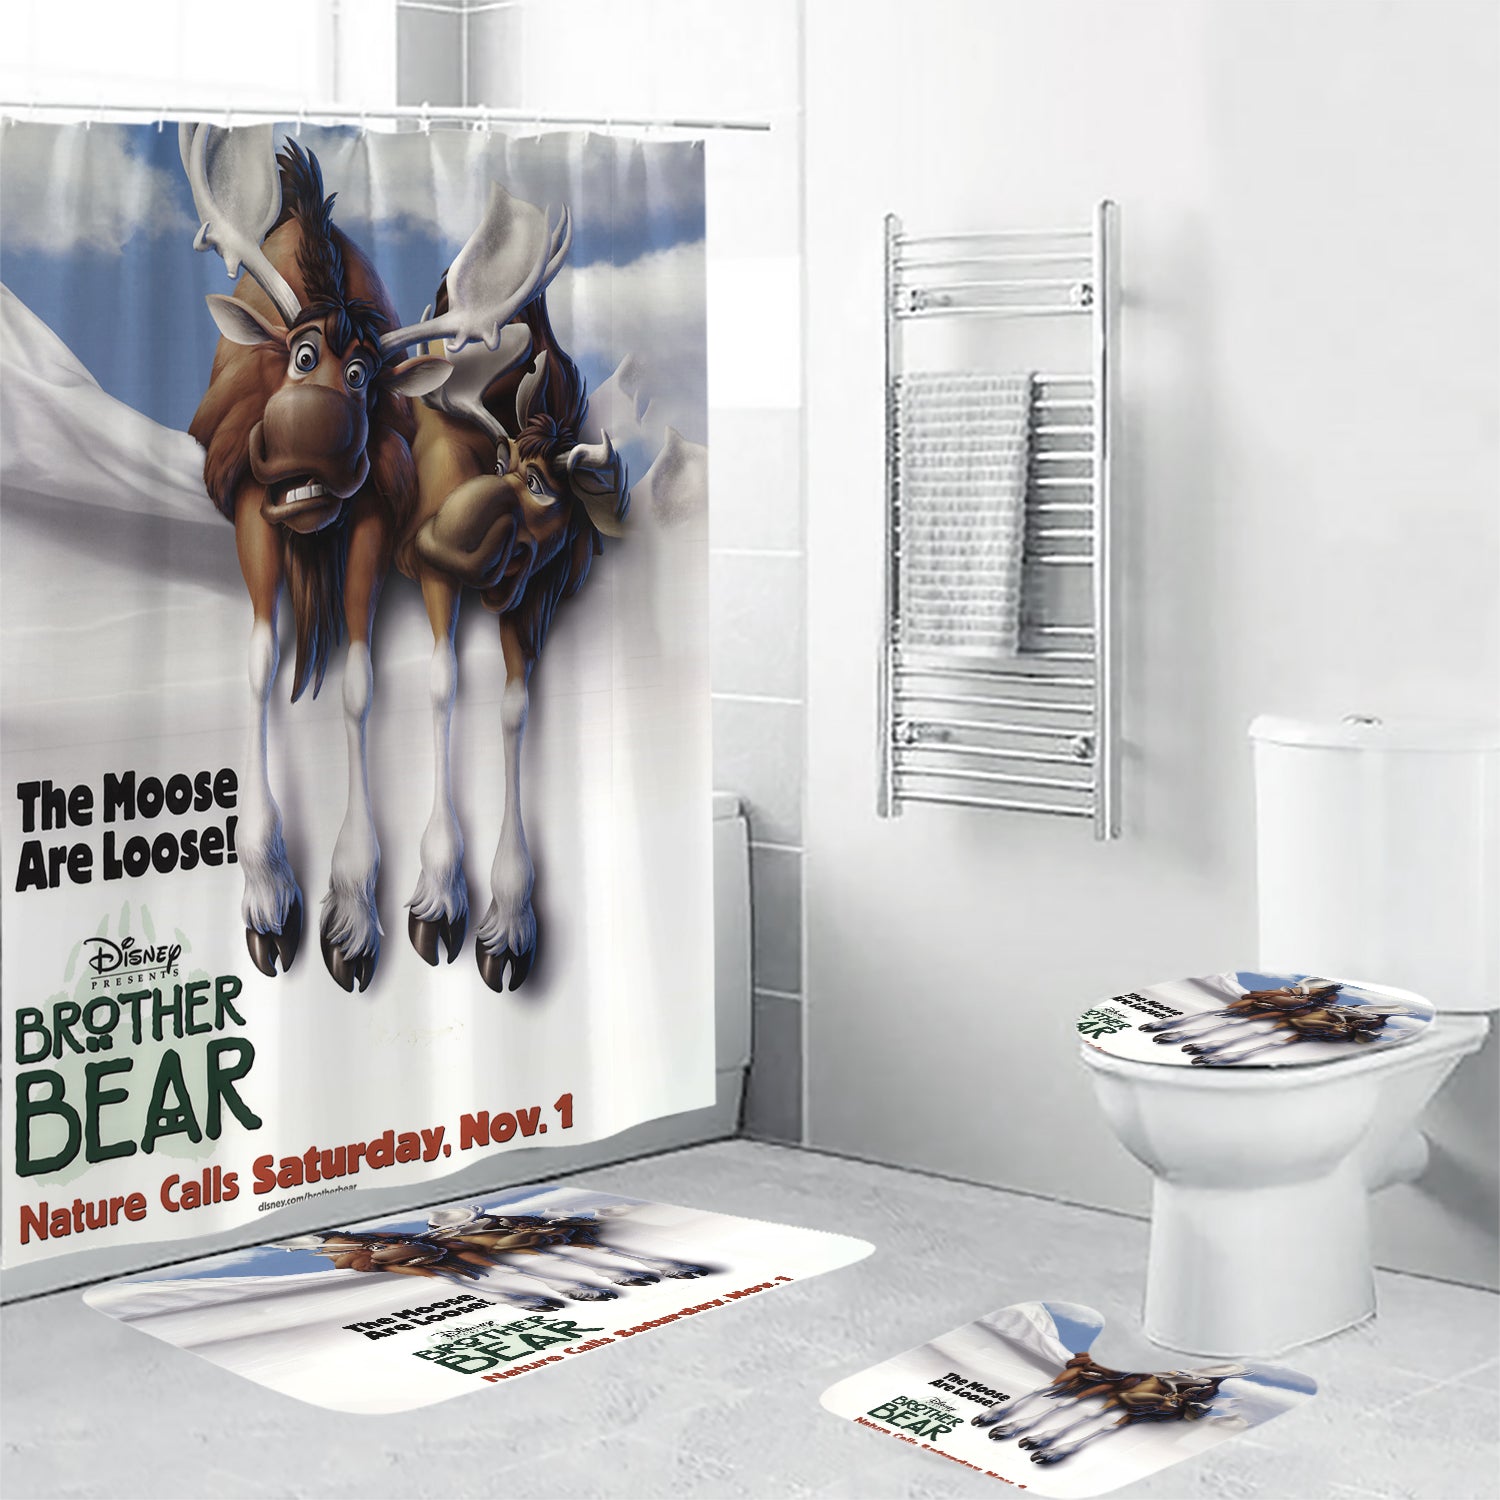 Brother Bear Poster 5 4PCS Shower Curtain Non-Slip Toilet Lid Cover Bath Mat - Bathroom Set Fans Gifts